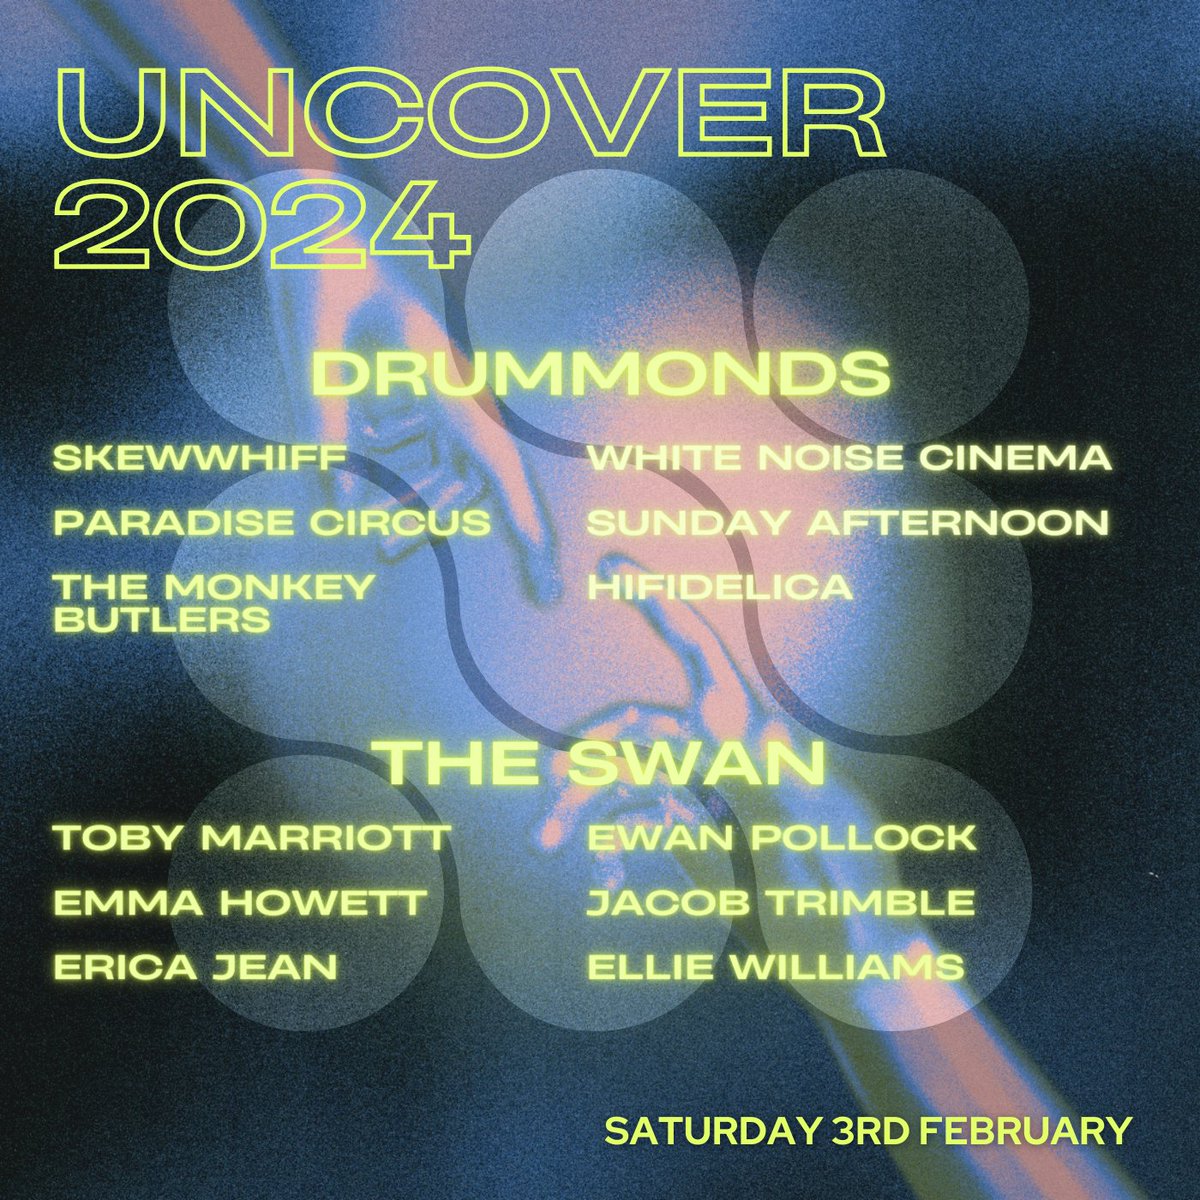 ONE WEEK TO GO 💙 Join us for a full weekend of live music in Drummonds and The Swan, Friday 2nd - Sunday 4th Feb 💥 Day and weekend tickets on sale now: uncover.seetickets.com/tour/uncover-2…